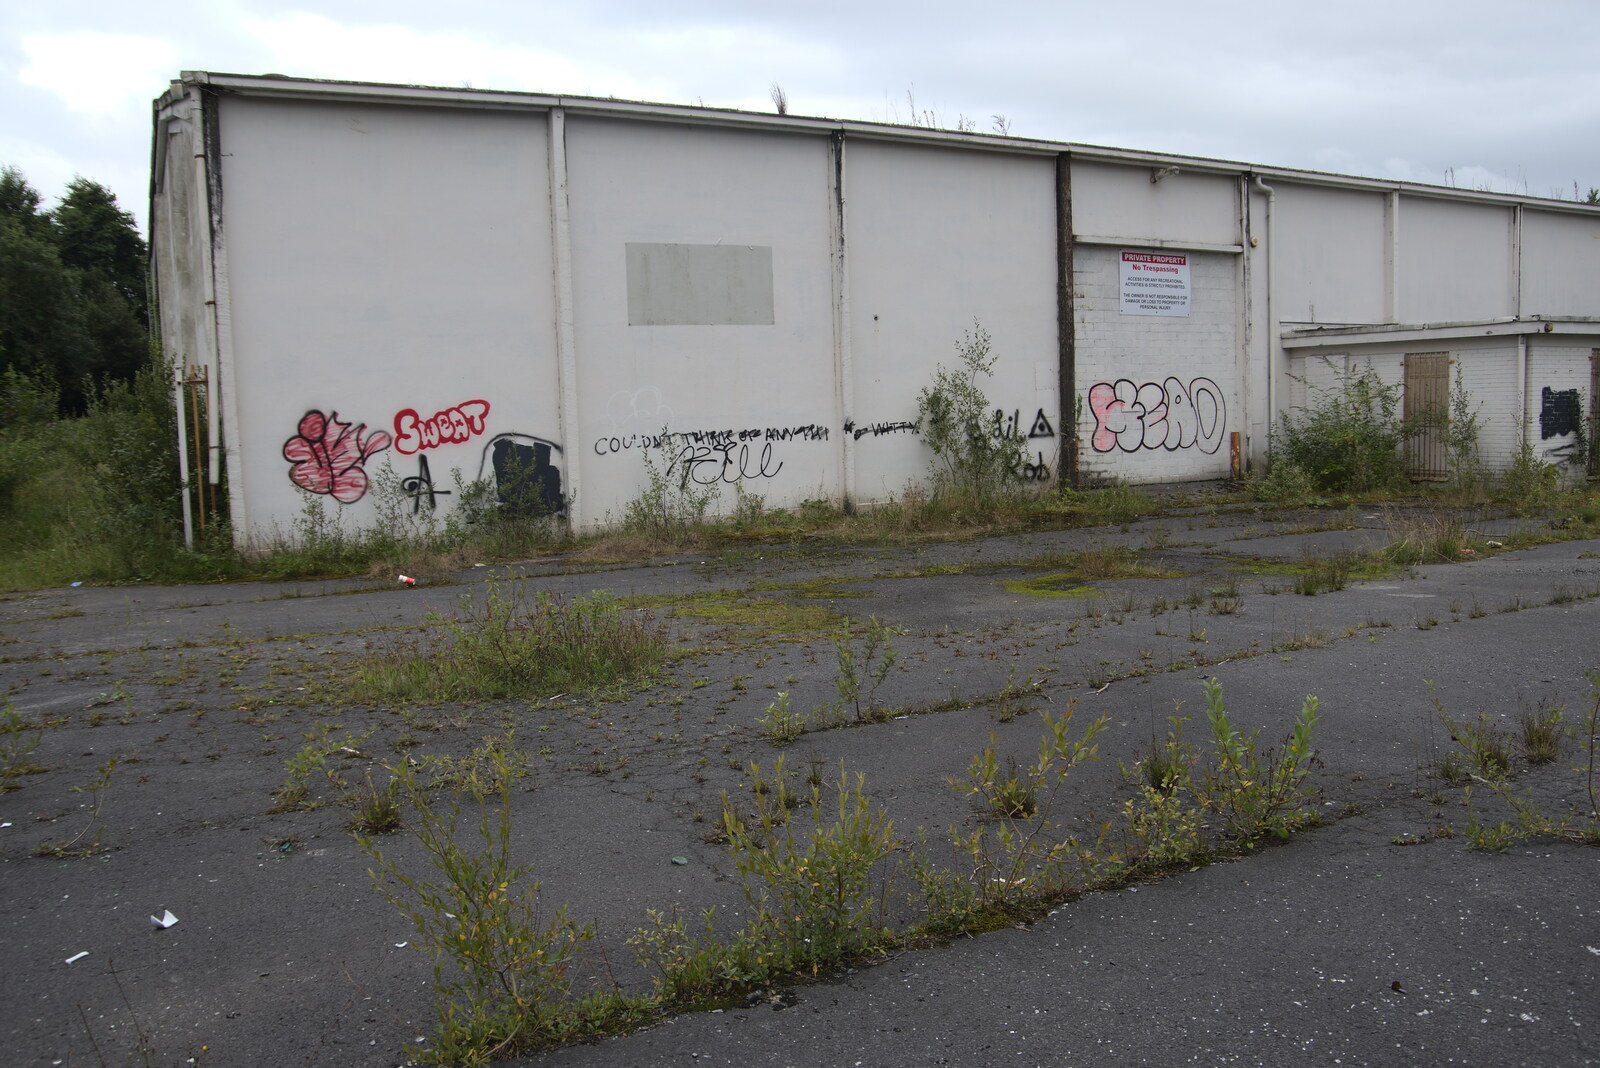 A derelict warehouse on the Link Road from Walks Around Benbulben and Carrowmore, County Sligo, Ireland - 13th August 2021